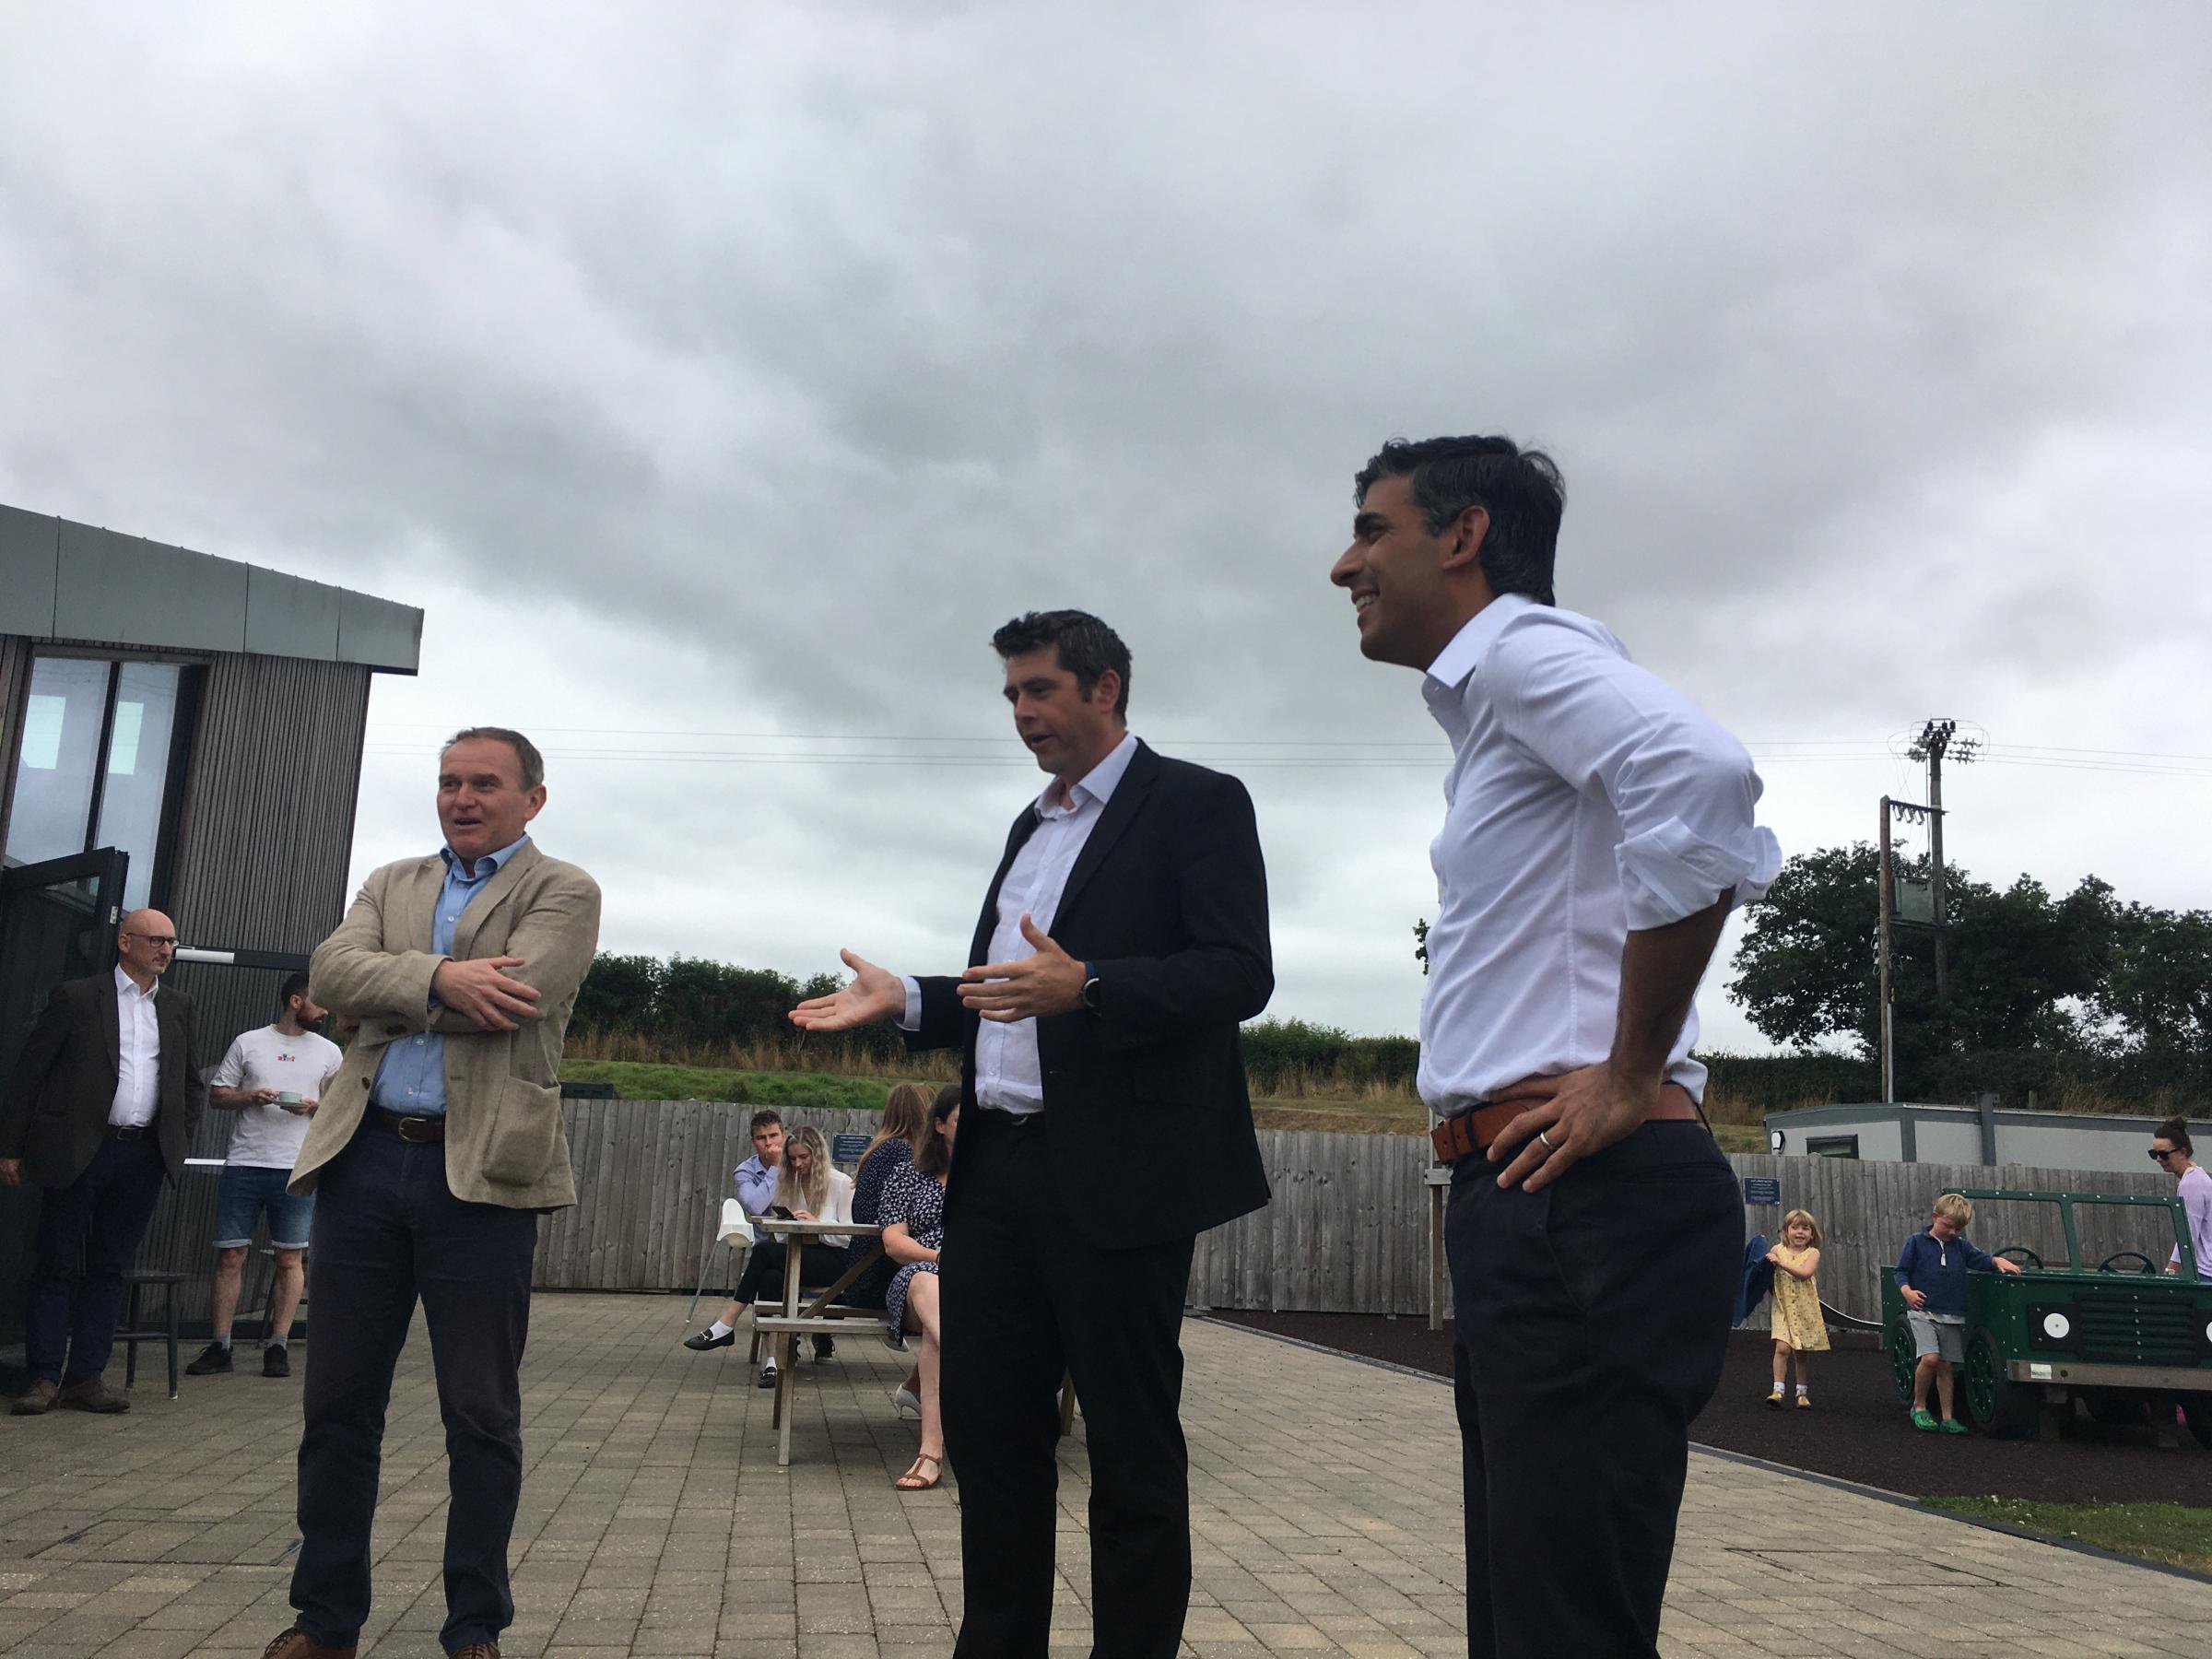 Rishi Sunak is introduced to Conservative Party members by MPs George Eustice (Camborne and Redruth) and Scott Mann (North Cornwall) Picture: Richard Whitehouse/LDRS